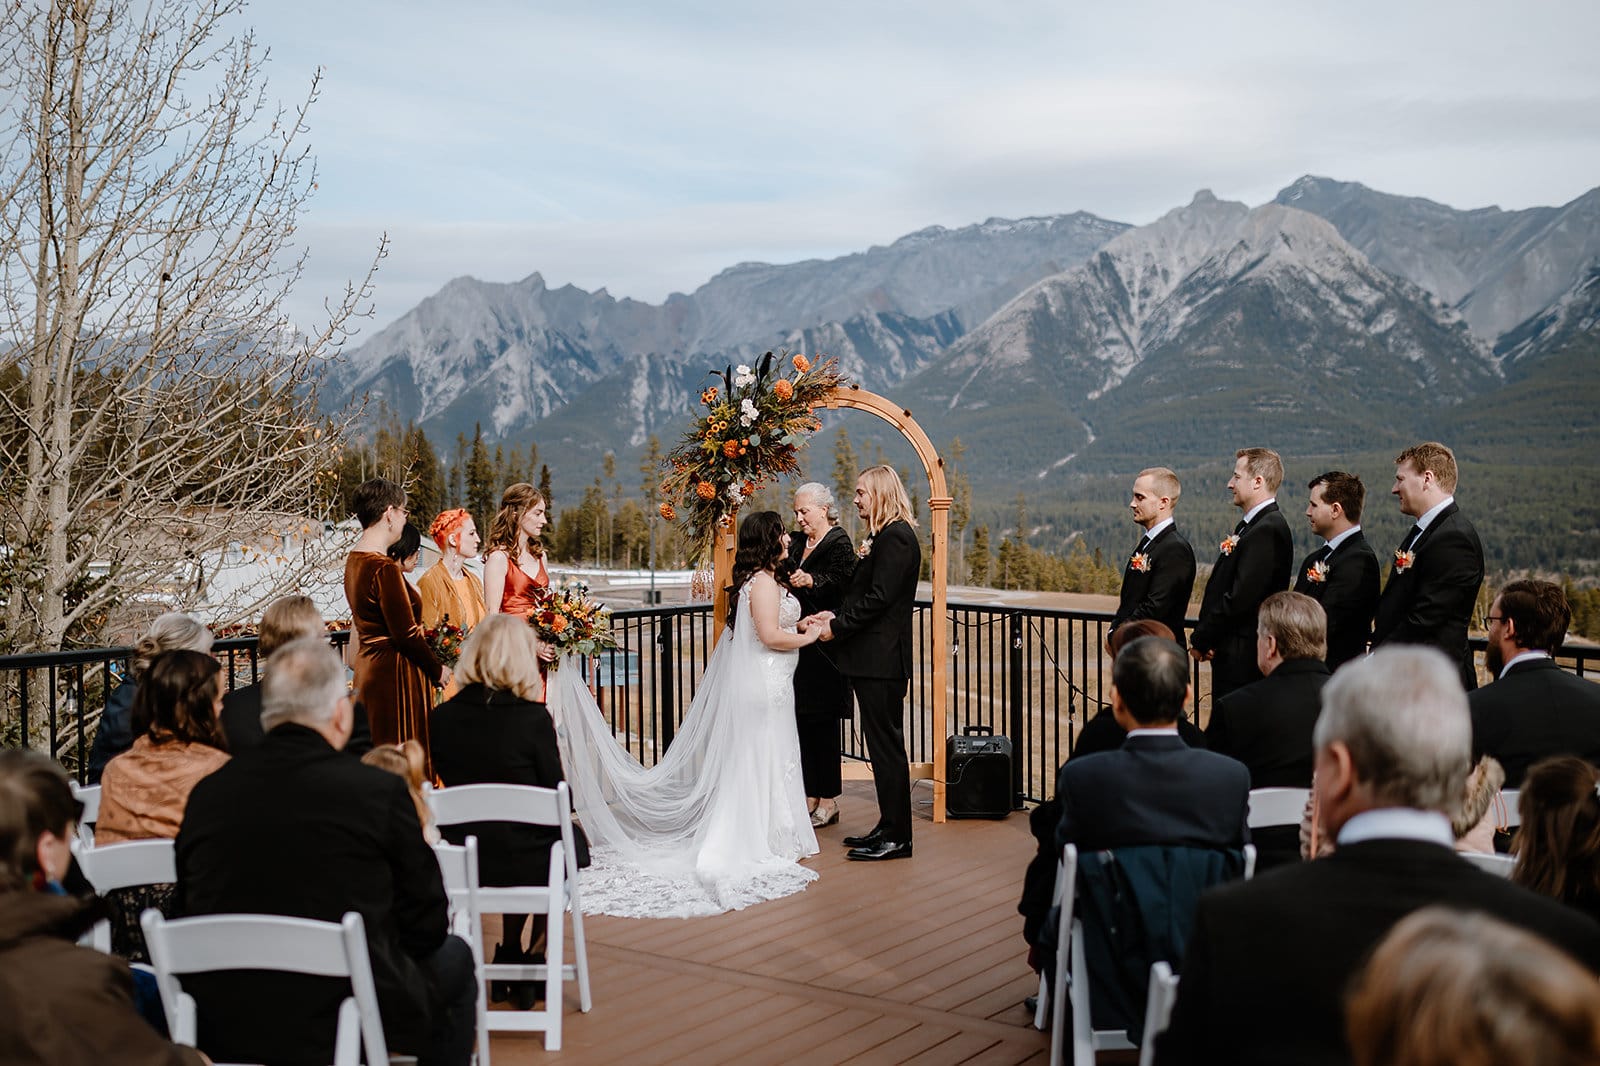 OURDOOR WEDDING CEREMONY AT BILL WARREN TRAINING CENTRE IN CANMORE, AB